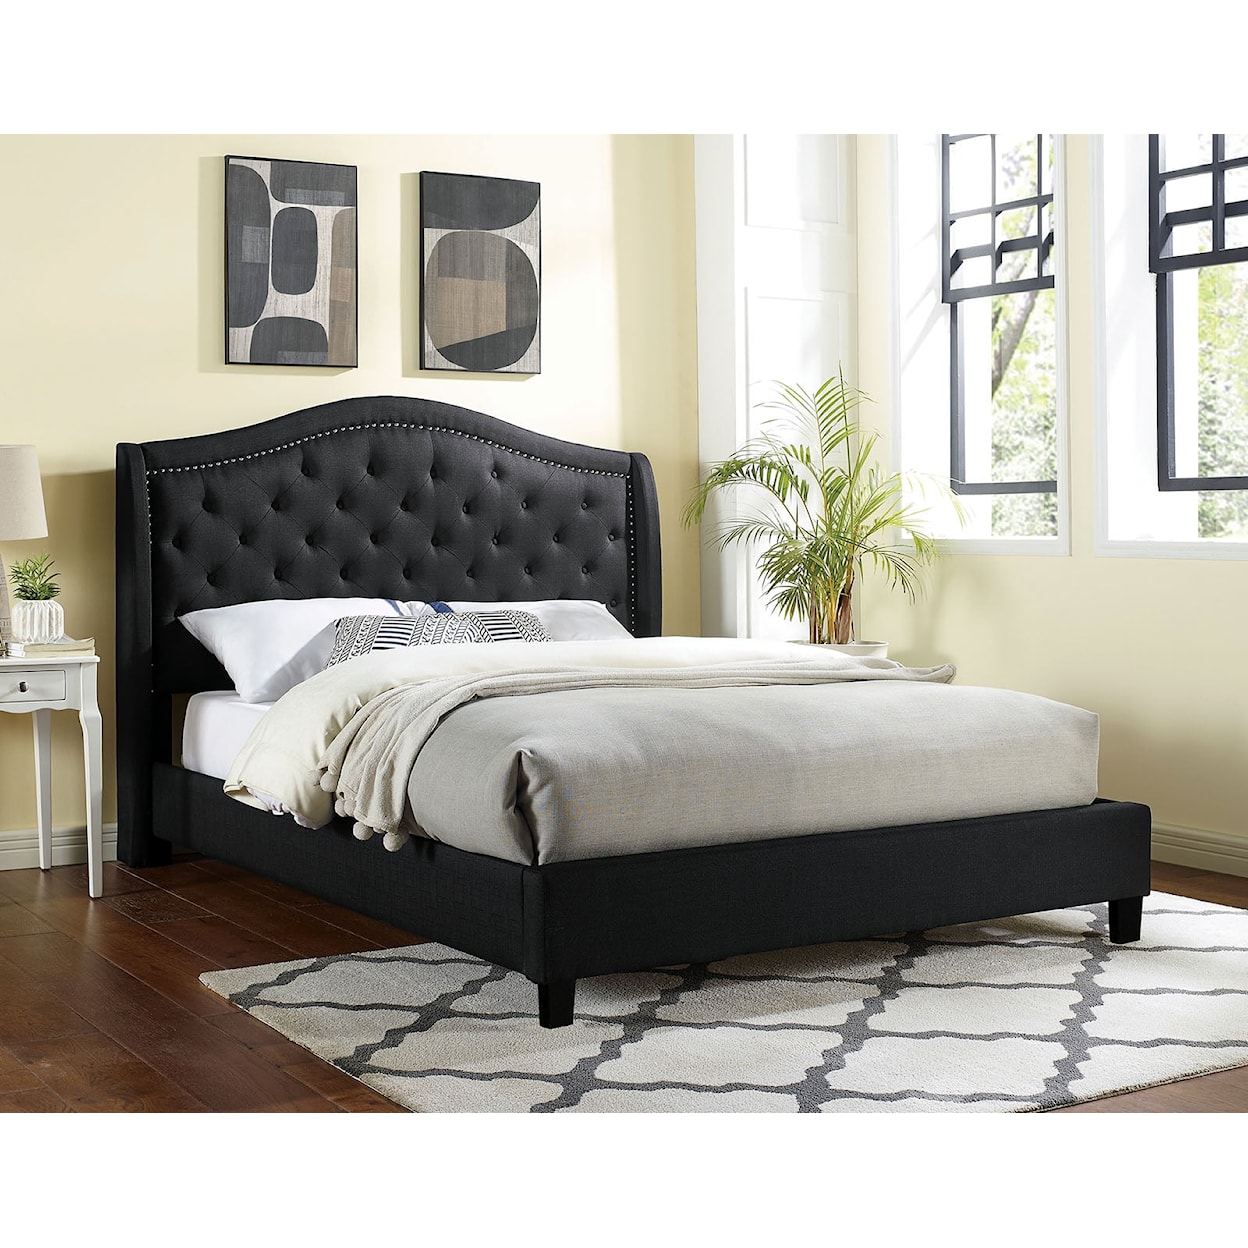 Furniture of America Carly E.King Bed, Black